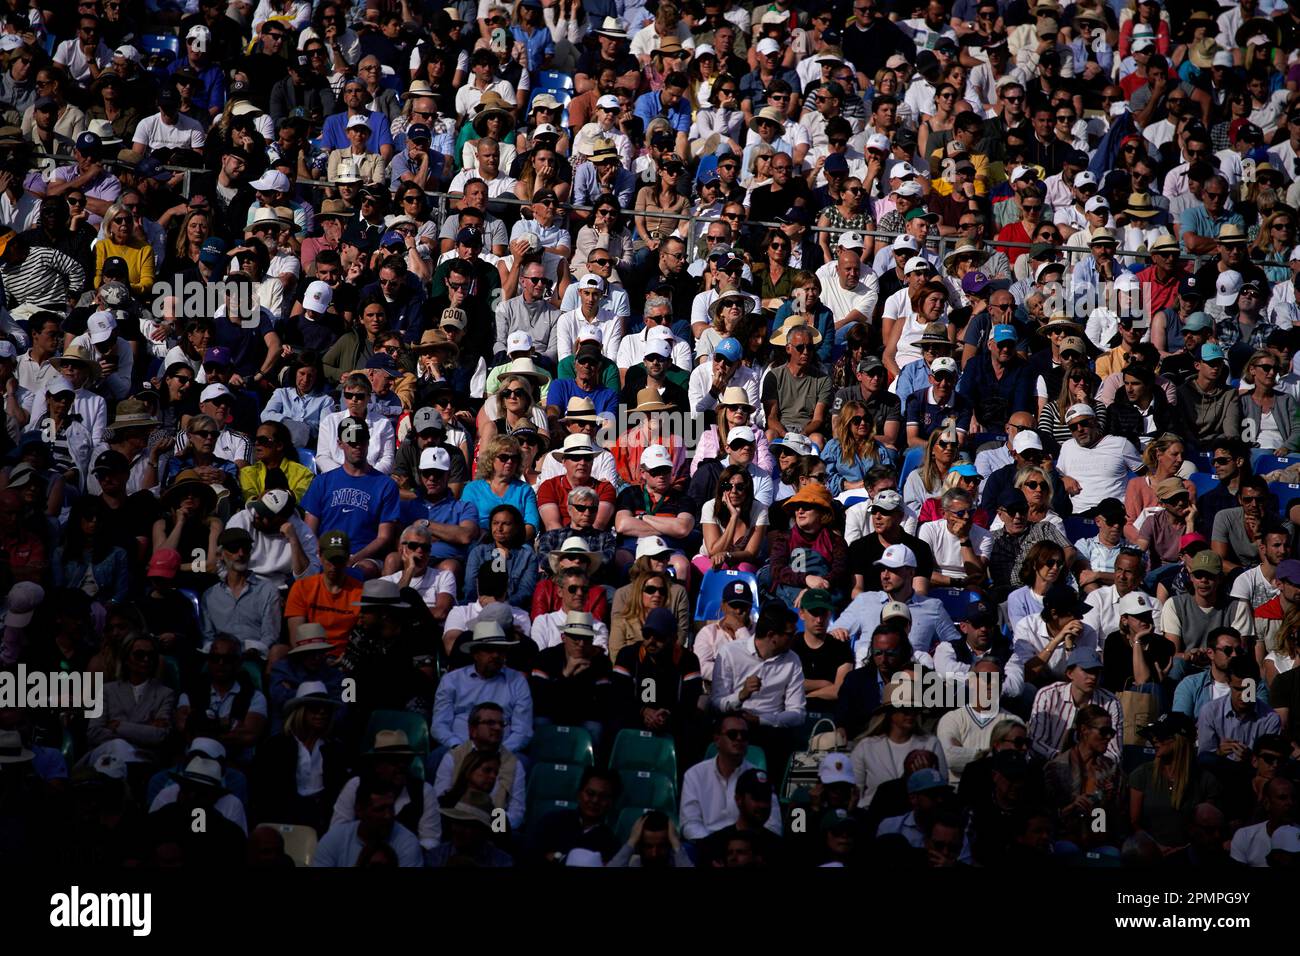 Fans watch the Monte Carlo Tennis Masters quarterfinals match between Lorenzo Musetti and Jannik Sinner, both of Italy, in Monaco, Friday, April 14, 2023